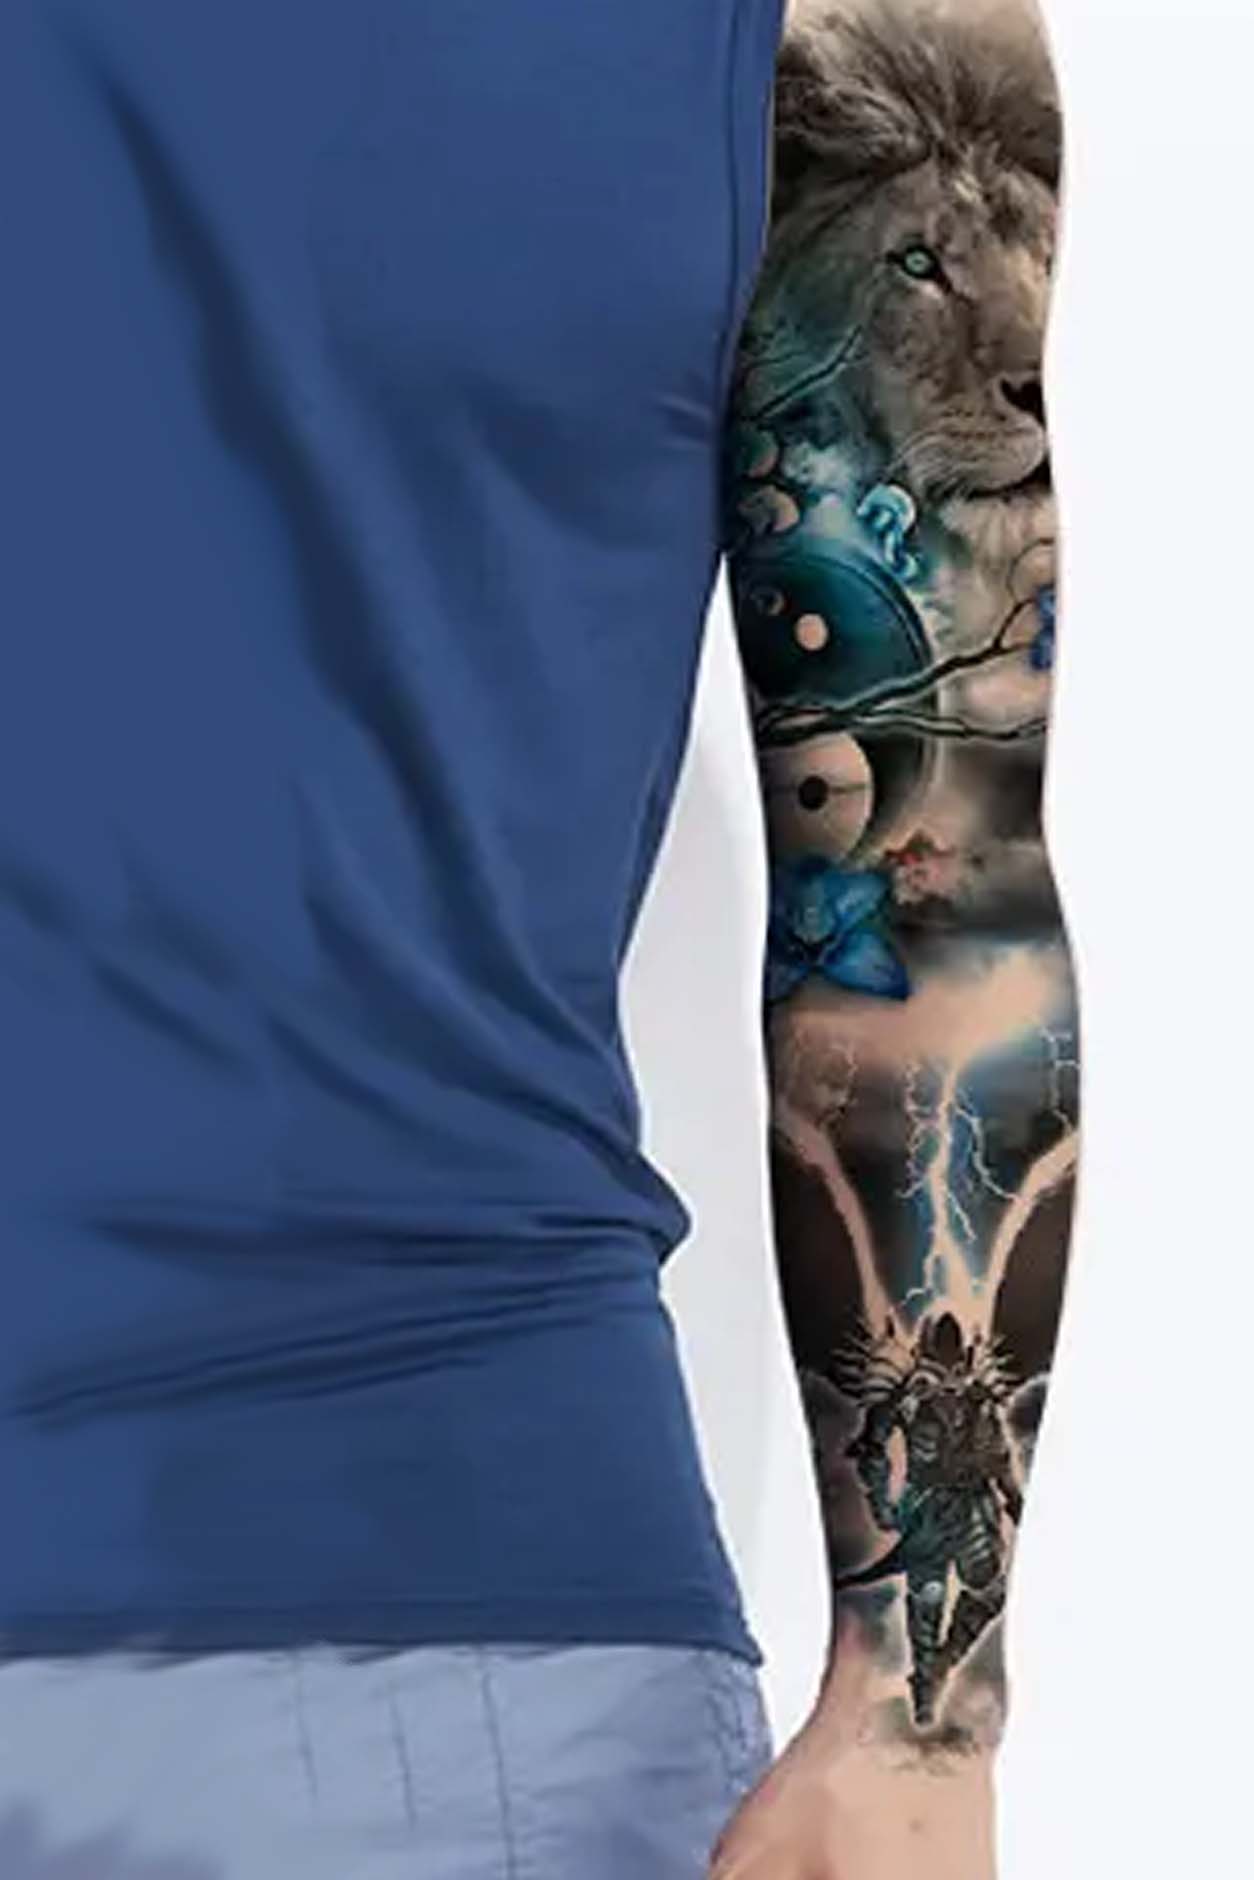 A guy is showing the full sleeve on his arm. In this temporary tattoo, the dark angel is descending from heaven. The lion represents power, strength, fearlessness, and strength in heaven above. The trees and flowers symbolize the beauty of the earth itself. This primarily black ink tat has accents of blue in the earthly items of flowers, lightning, and blossoms. Display this artwork on an arm, leg, or back.